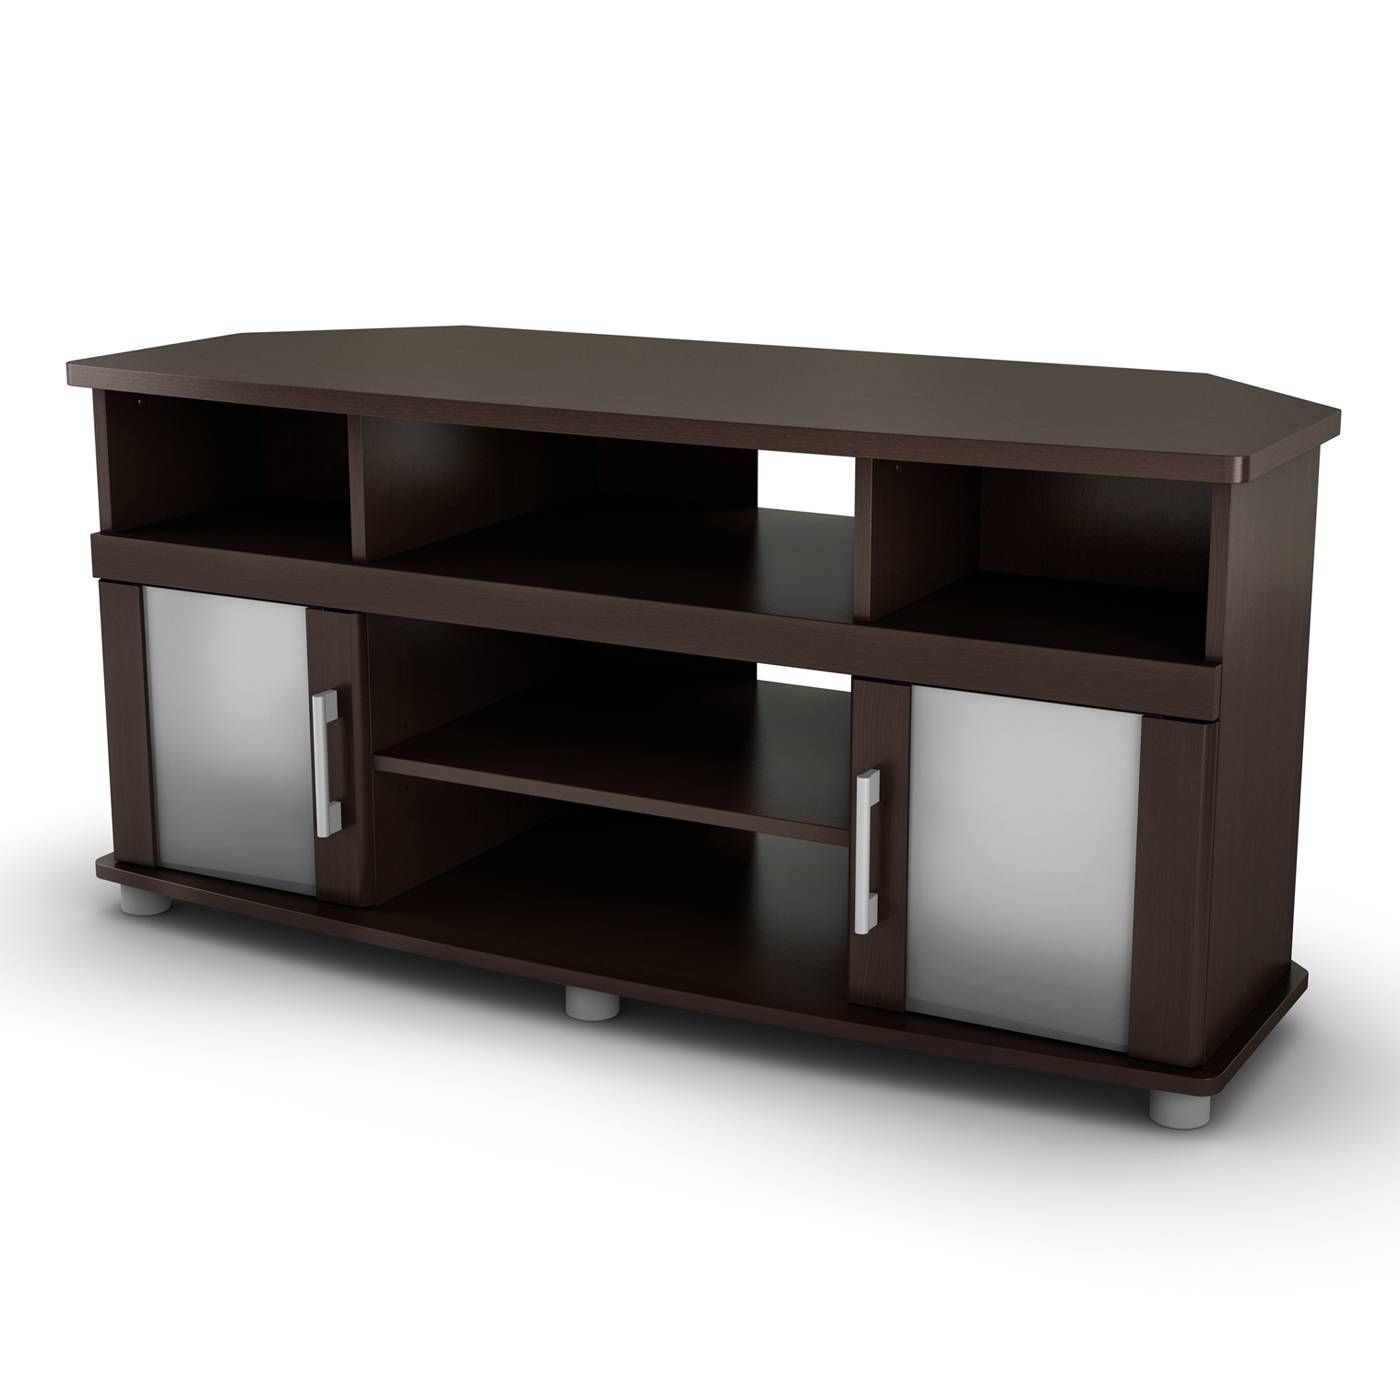 South Shore Furniture City Life Corner Tv Stand | Lowe's Canada Throughout Tv Stands For Corner (Photo 12 of 15)